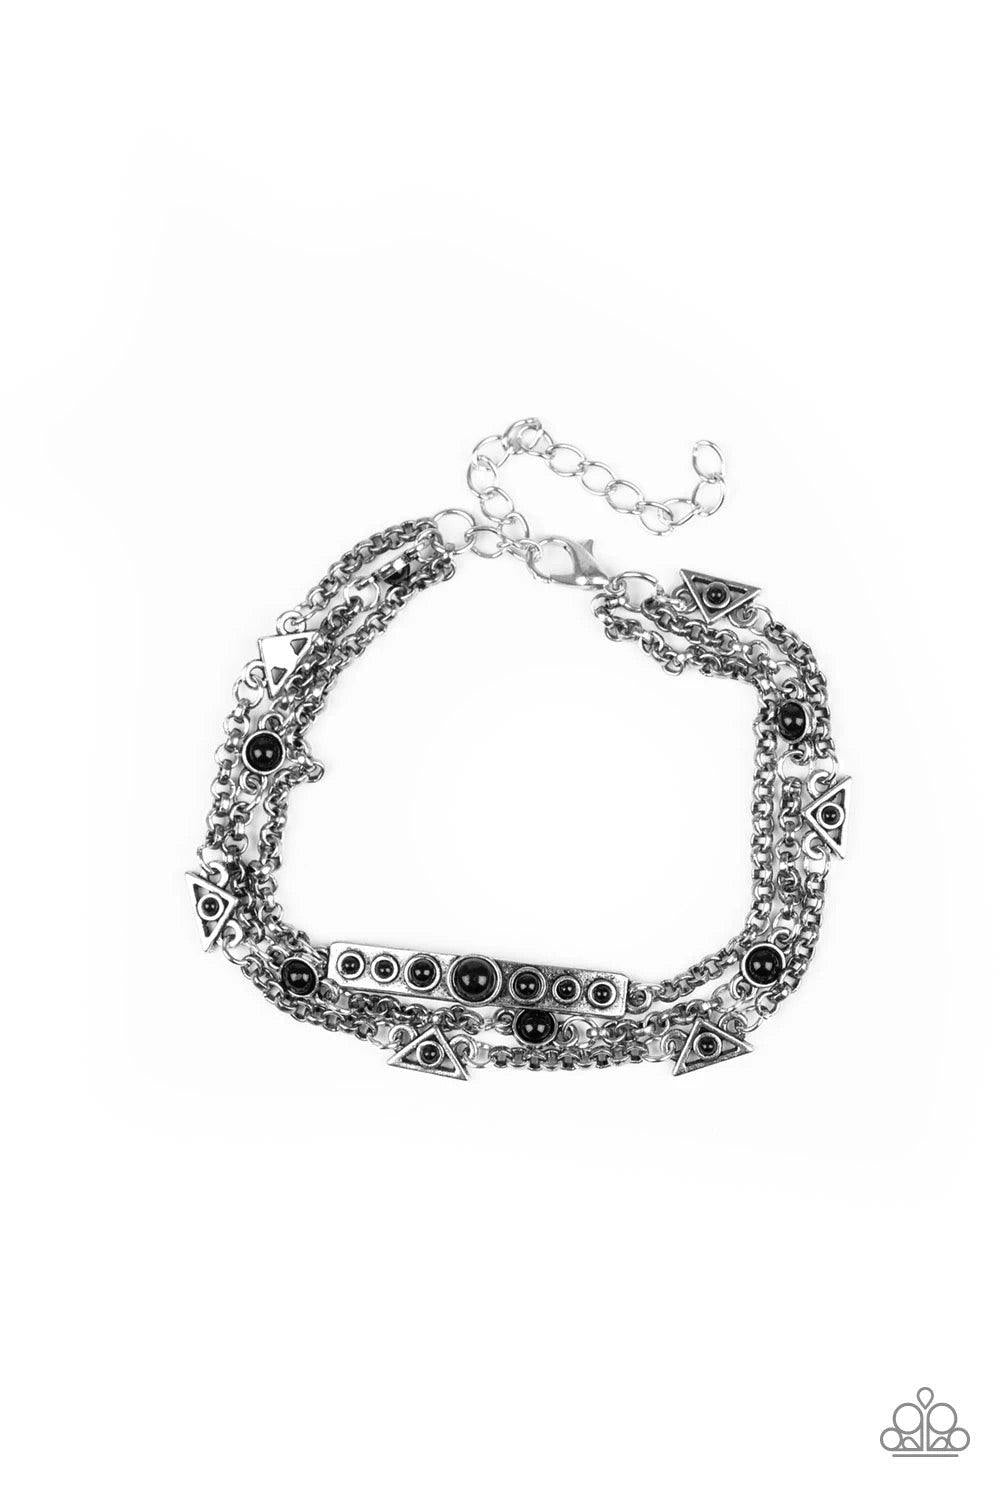 Paparazzi Accessories No Means NOMAD - Black A dramatic collection of oversized white pearls and textured copper rings interconnect across the chest, creating a bold display of refinement. Features an adjustable clasp closure. Jewelry